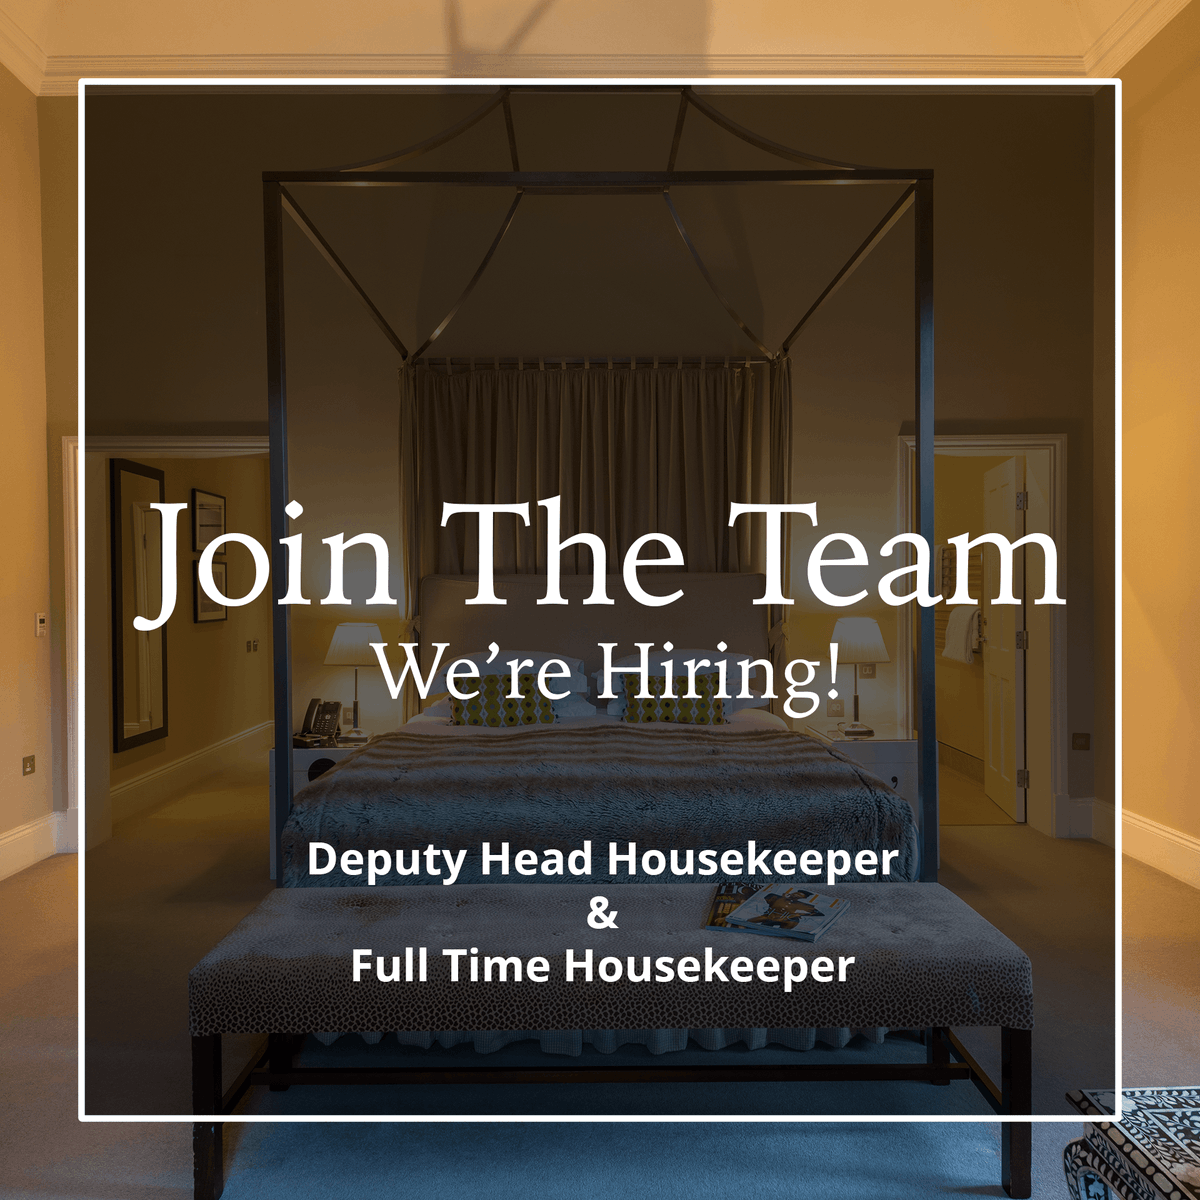 We’re looking for a highly motivated and experienced individual to join the team as our Deputy Head Housekeeper. Demonstrable knowledge of scheduling, rostering and staff management is vital. For further information, please visit: ow.ly/7M4e50MxqvU